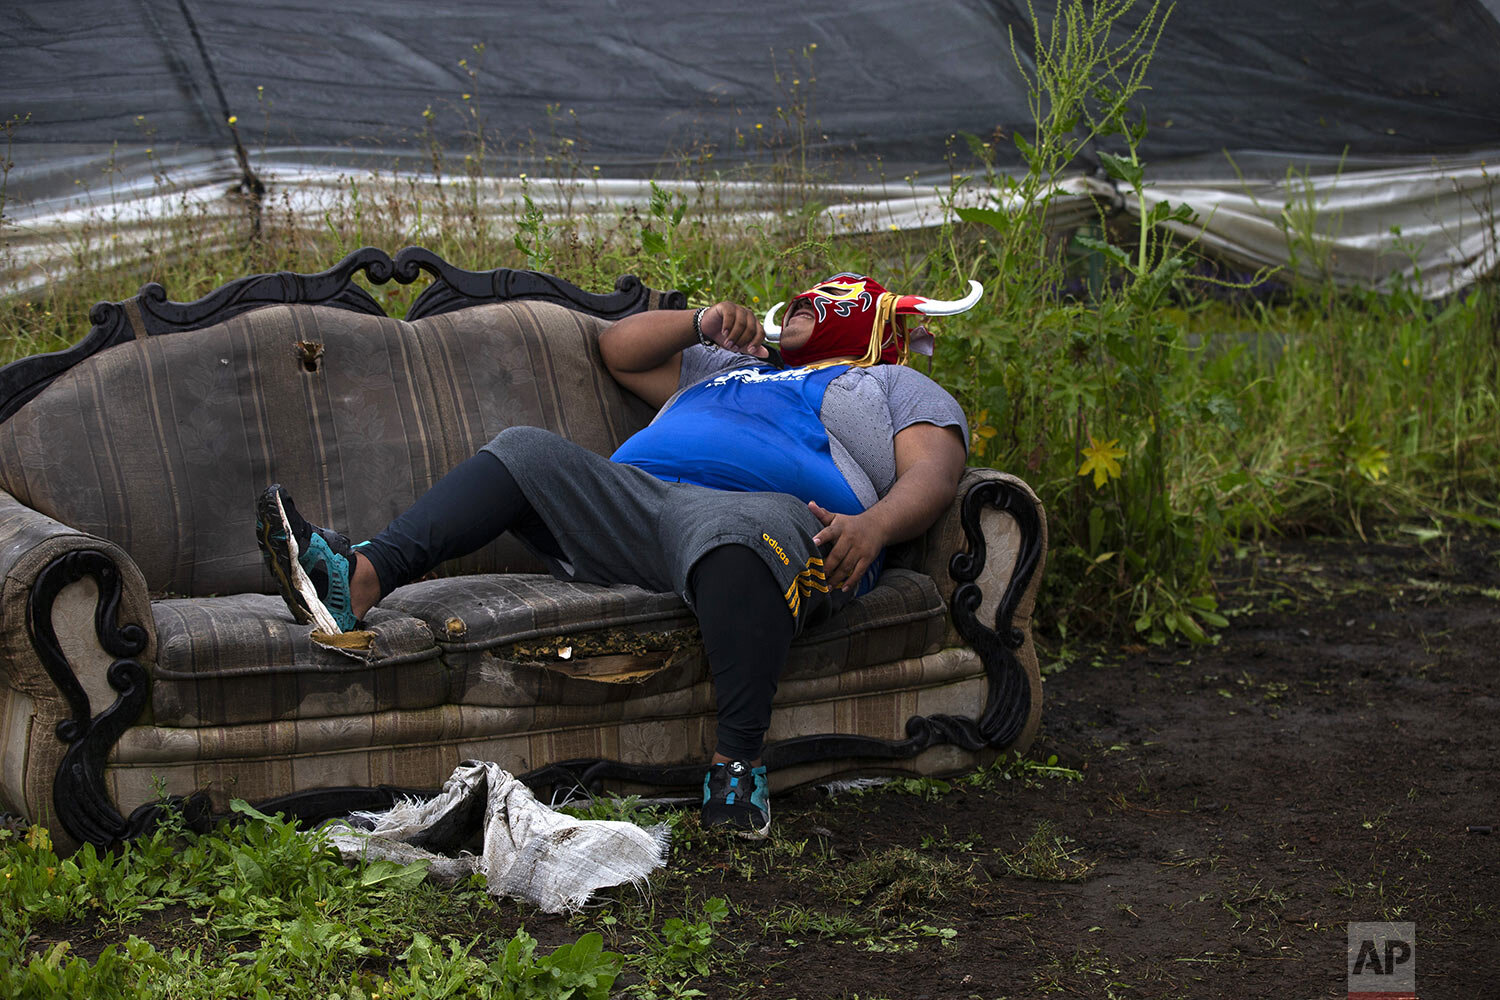  Lucha Libre wrestler "Mister Jerry" rests after training amid Xochimilco's floating gardens on the outskirts of Mexico City, Aug. 20, 2020, by an impromptu ring where he and his two wrestler brothers plan to live stream fights and charge for them, w